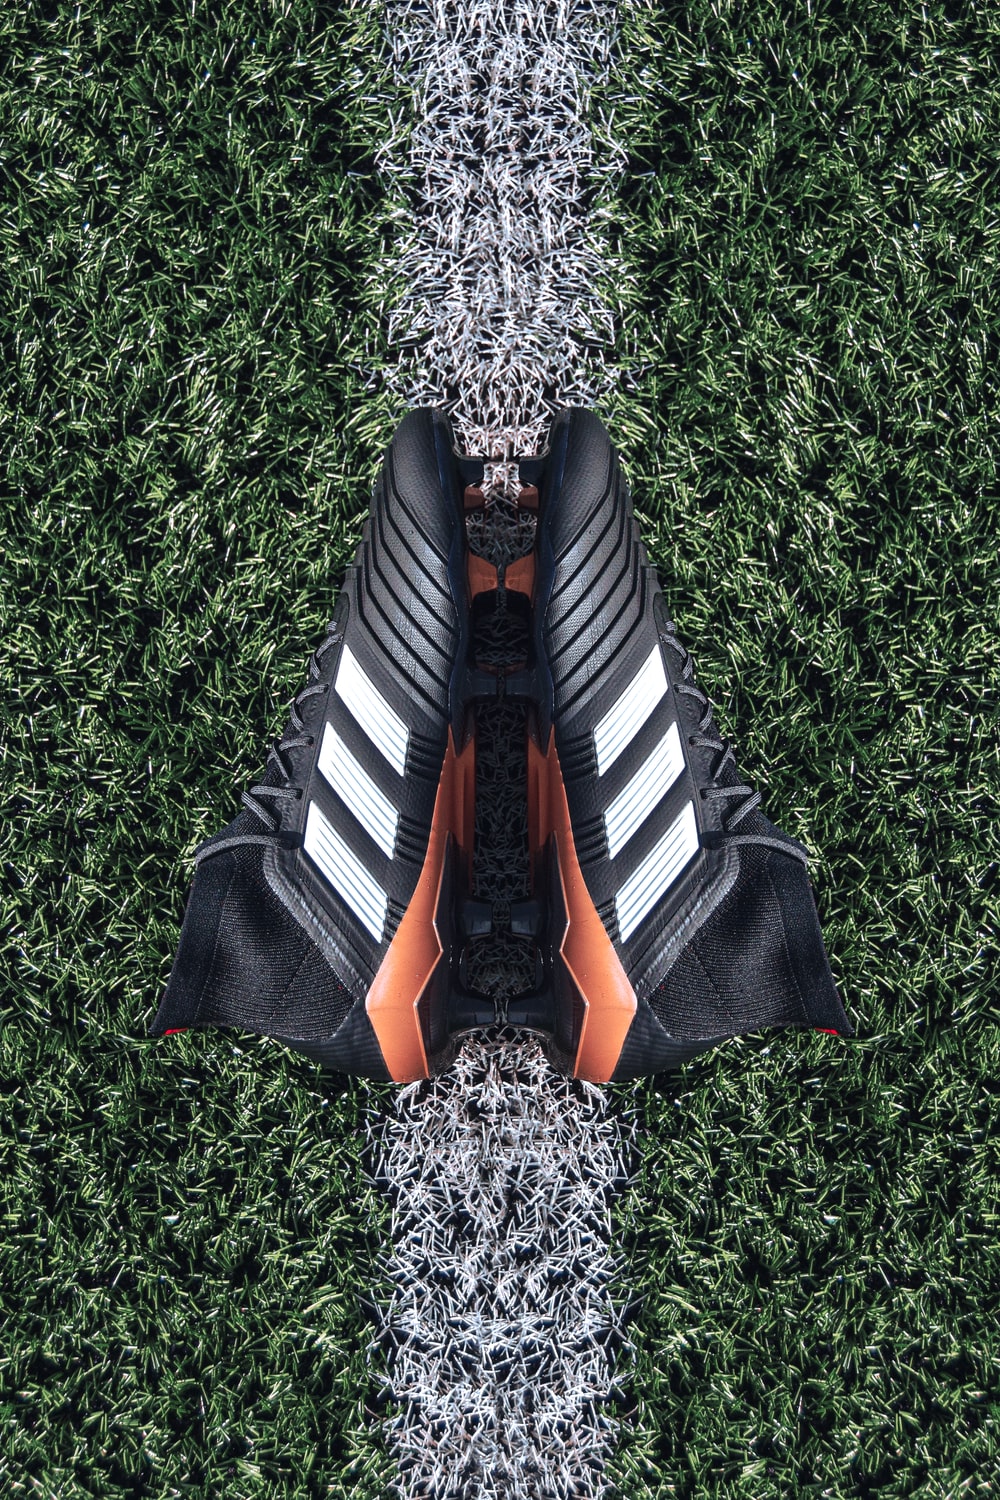 pair of black Adidas cleats on grass field photo